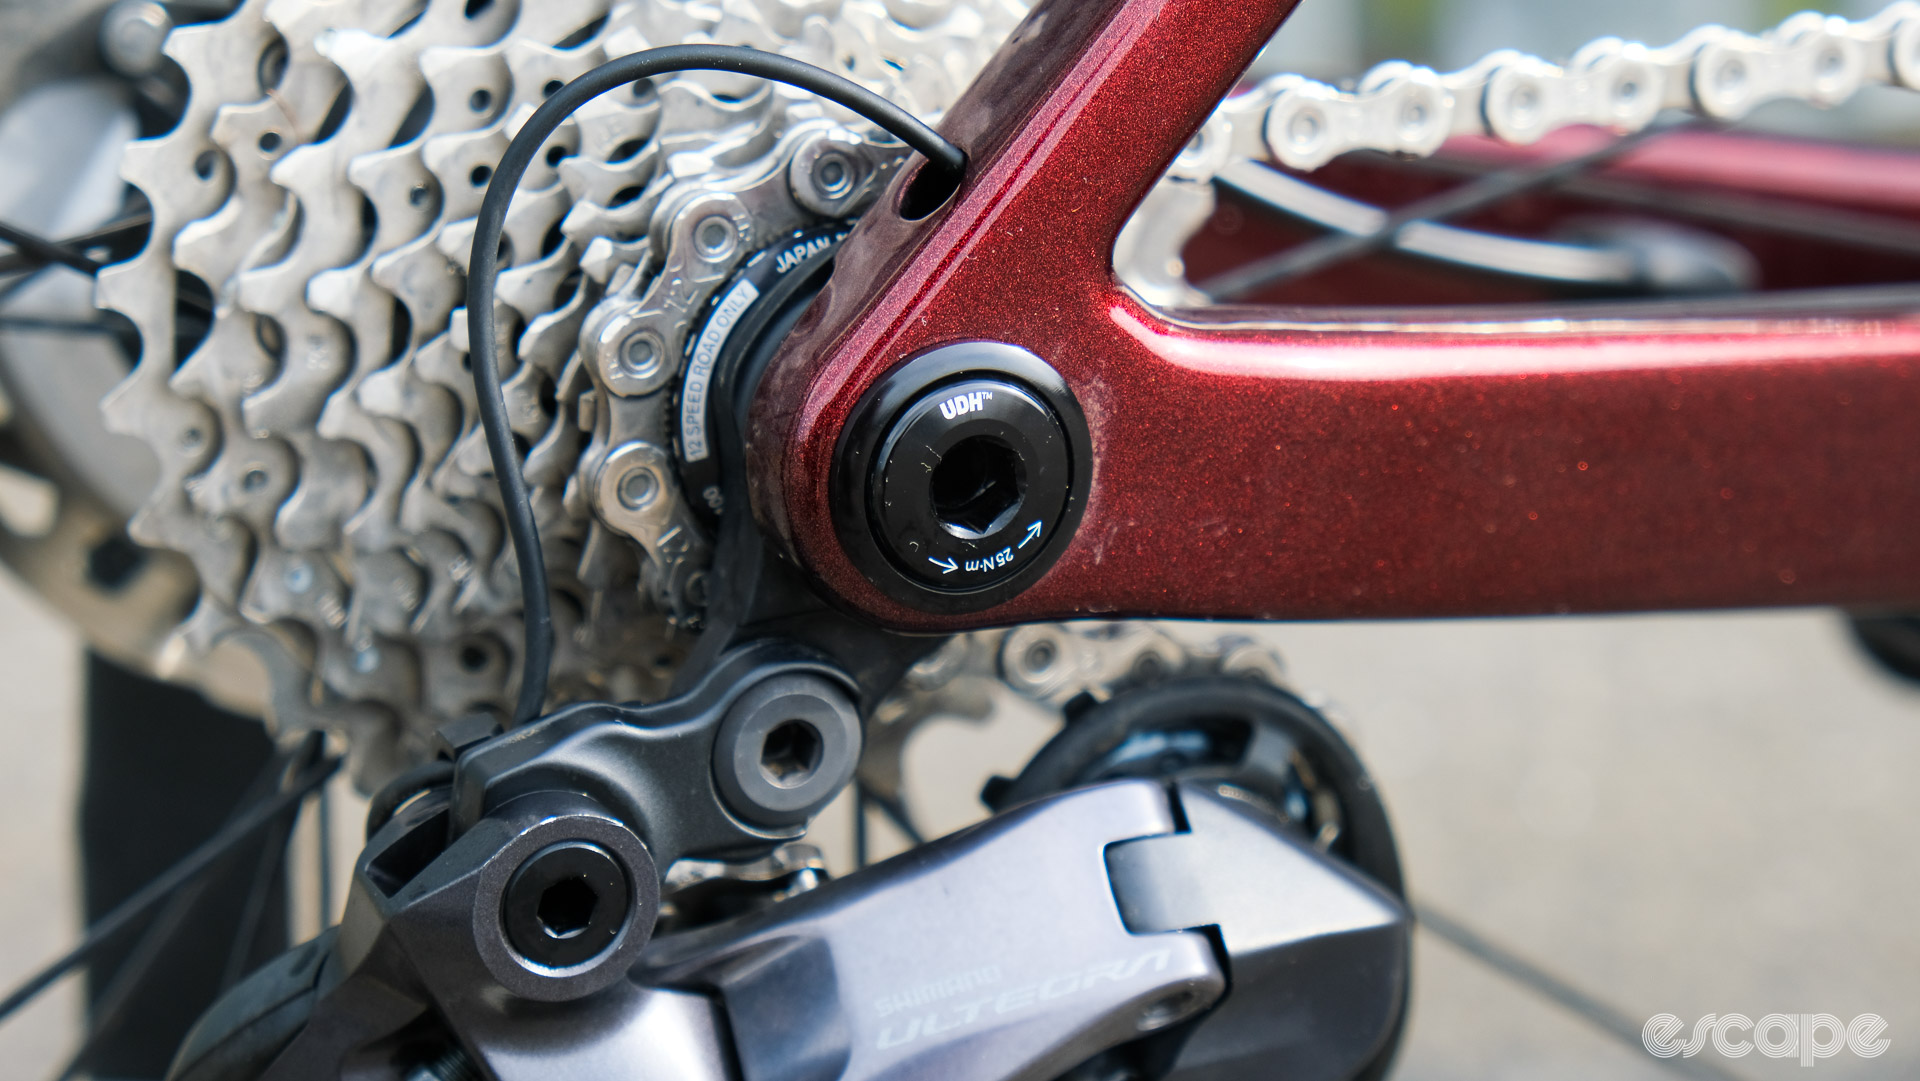 A closeup of the rear dropout on the Falcn RS, showing another usage of SRAM's UDH derailleur mount, and exit port routing for electronic shifting wire.